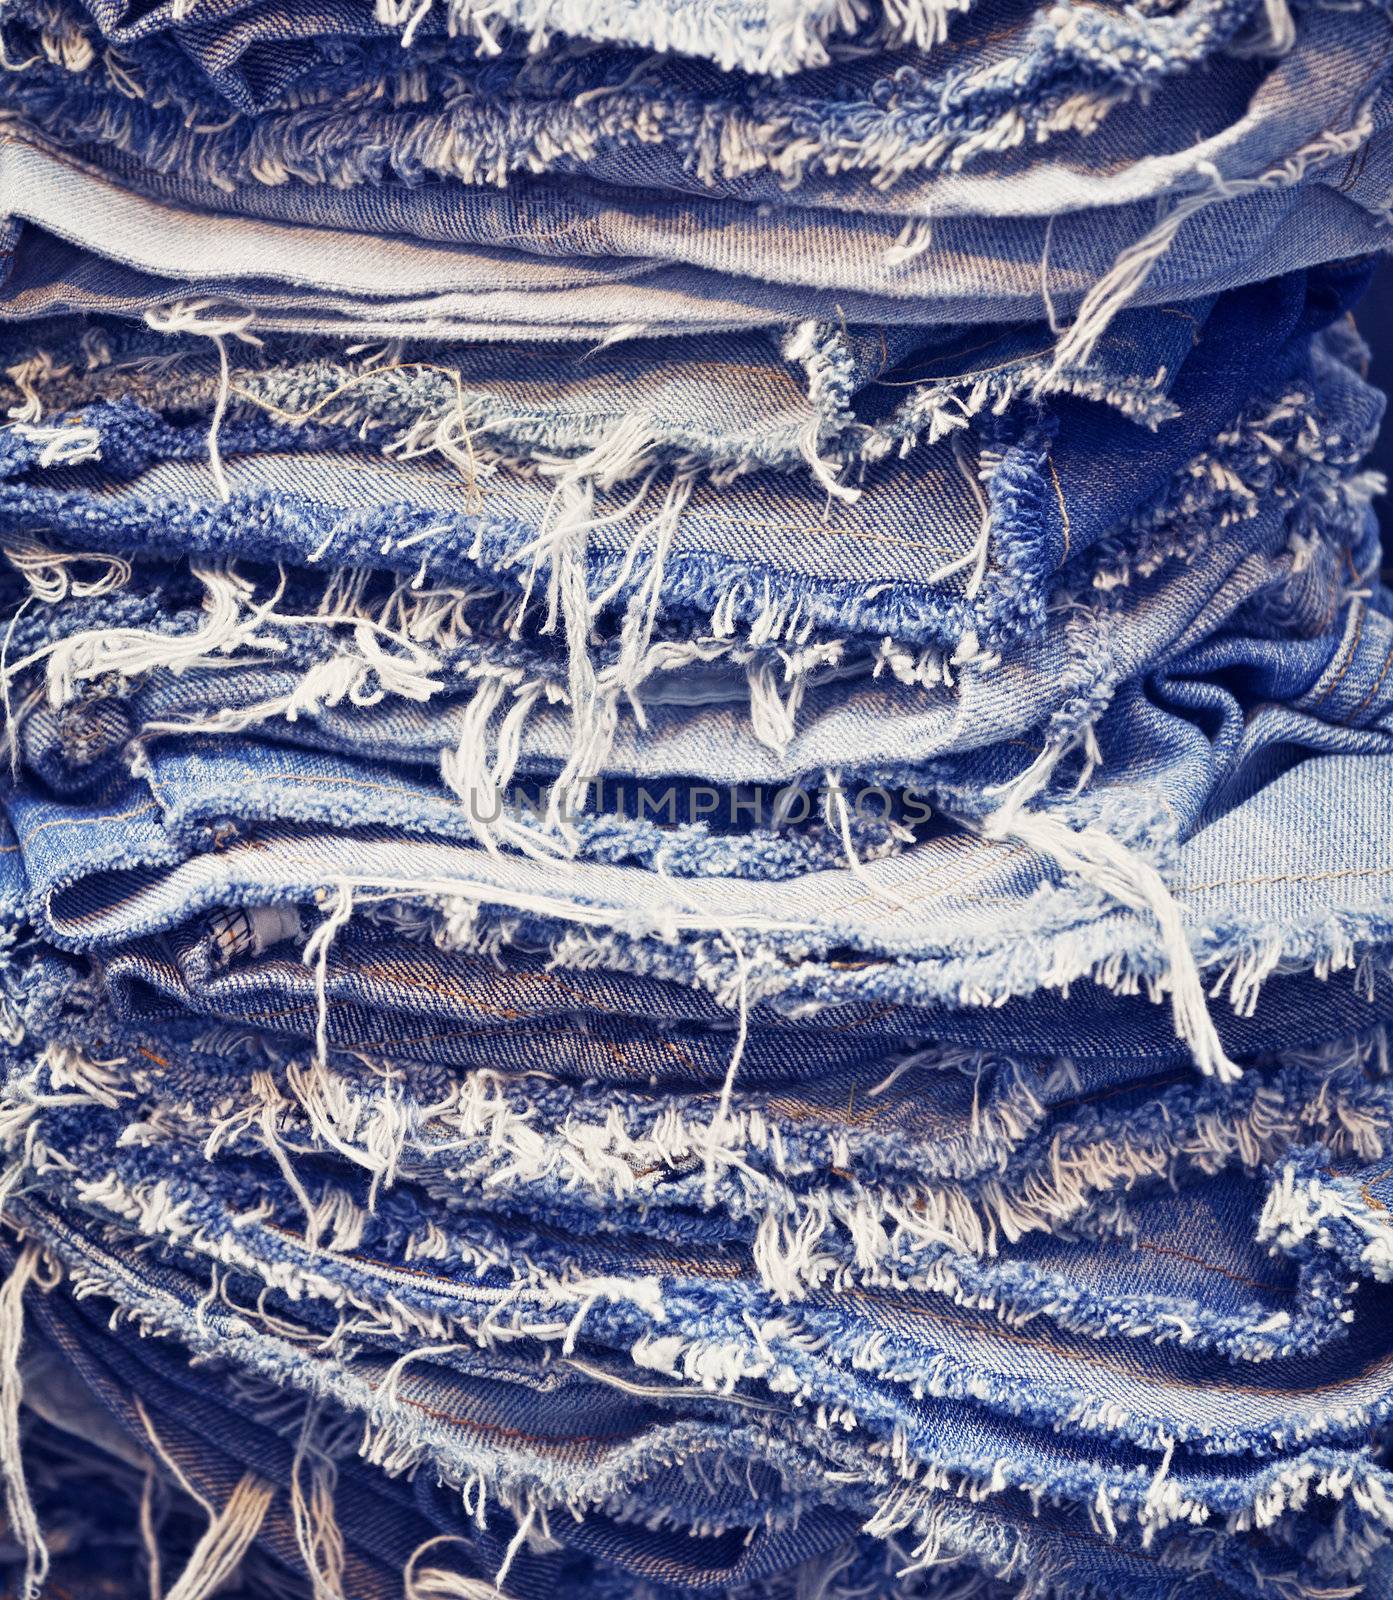 Torn jeans in stack by pzaxe